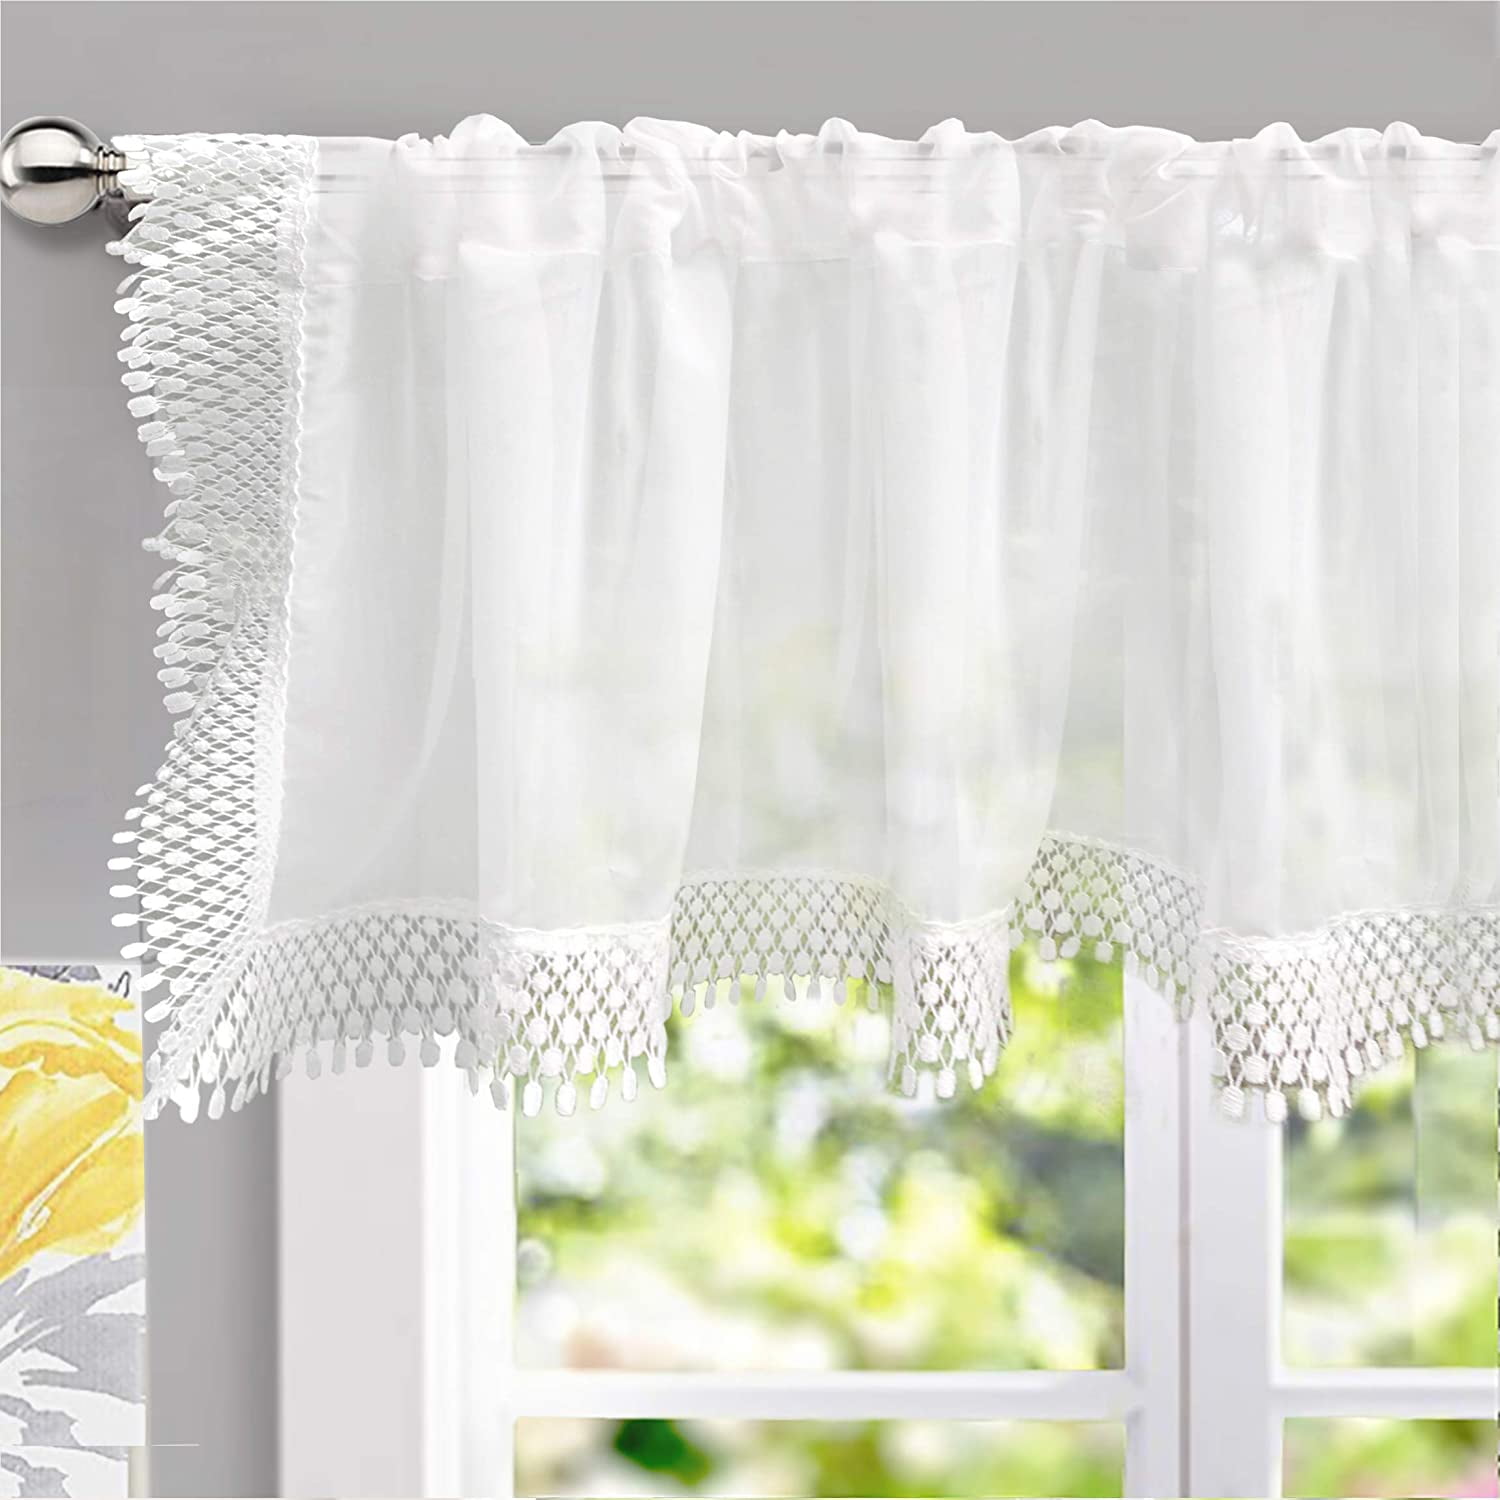 Driftaway Ava Voile Sheer Curtain Valance With Lace And Crochet Trim Soft White Voile Chiffon Plain Sheer Window Valance Curtain Panel For Small Window And Kitchen Single 60 Inch By 18 Inch